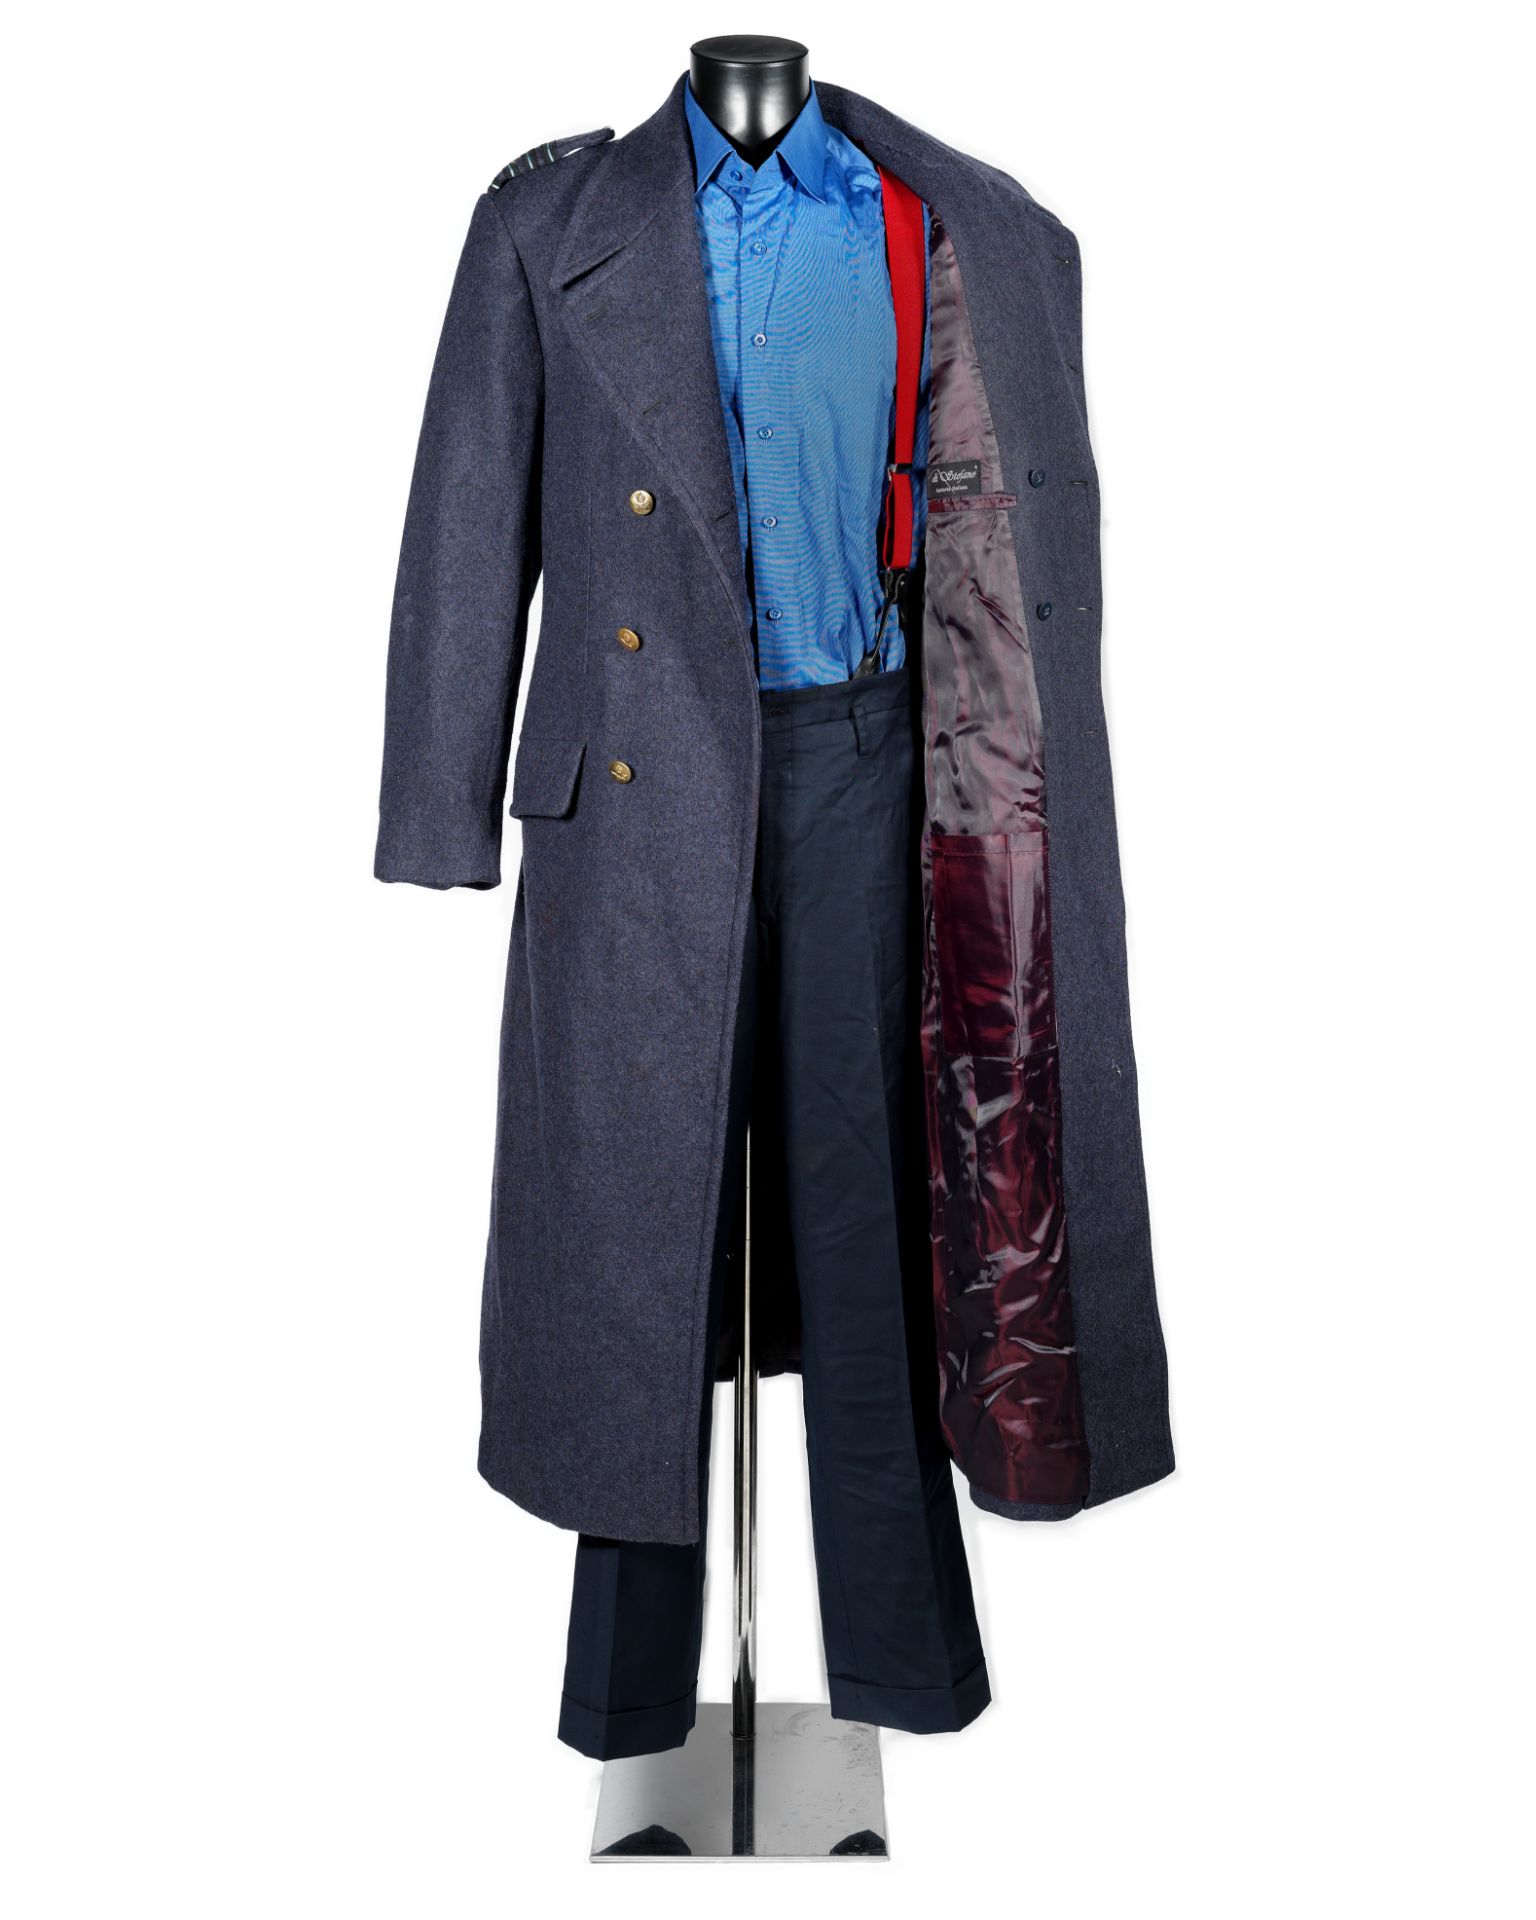 Torchwood: A full costume worn by John Barrowman for his role as 'Jack Harkness' in Miracle Day, ...